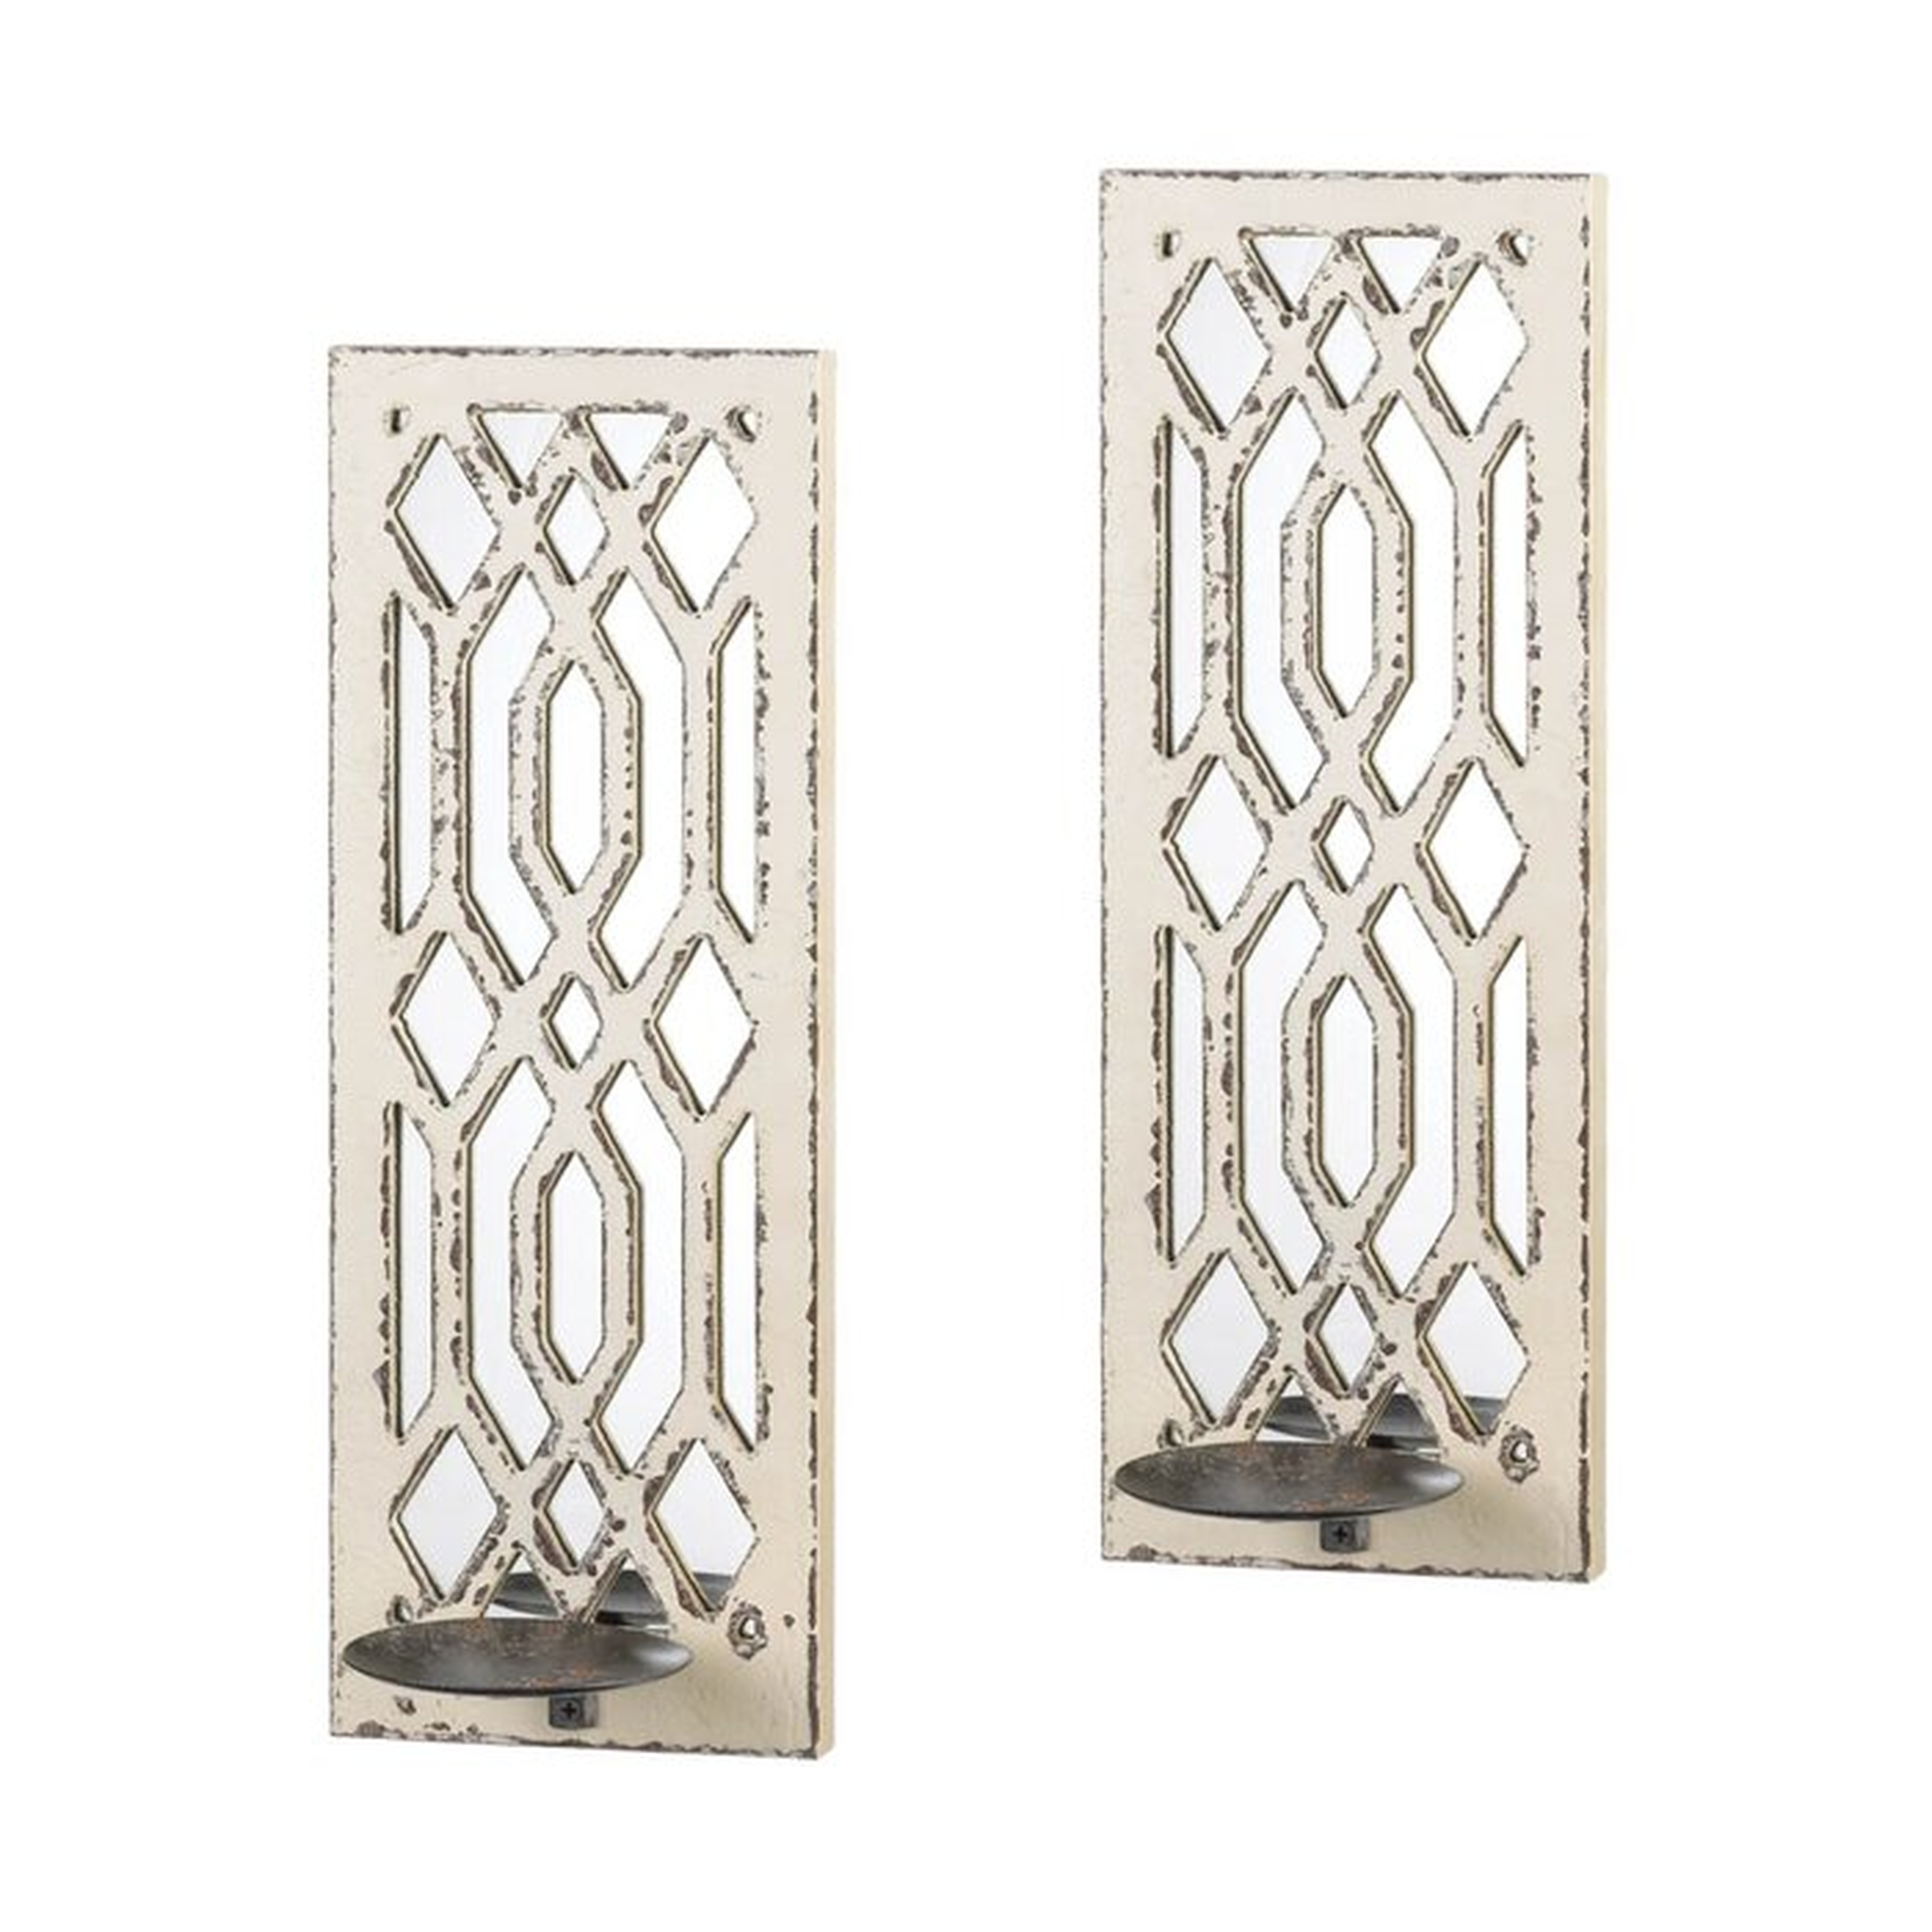 Deco Tall Wood and Metal Wall Sconce (Set of 2) - Birch Lane